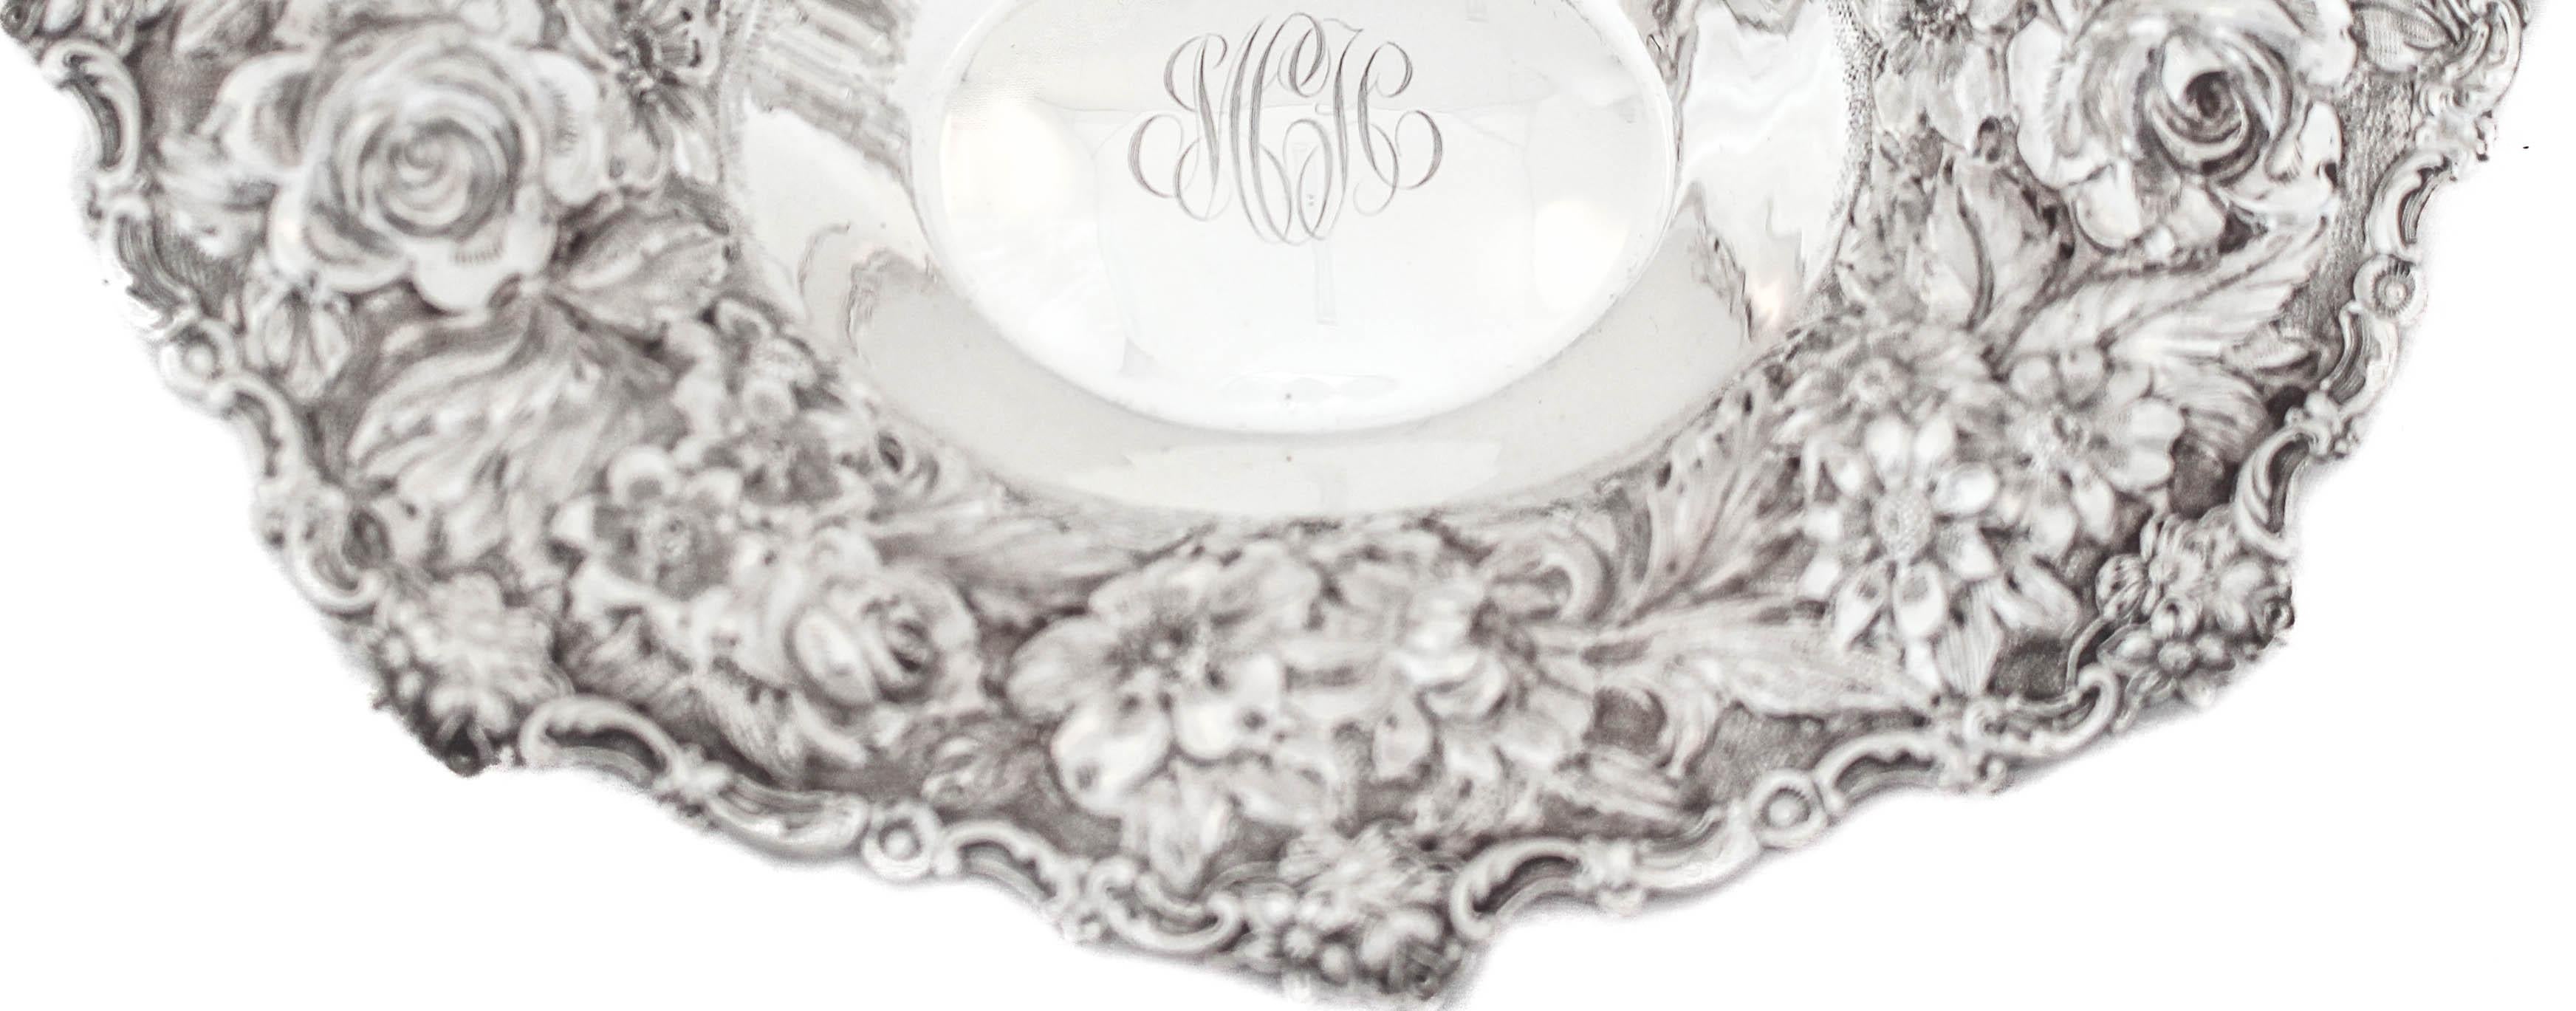 Mid-20th Century Sterling Silver Repousse Bowl For Sale